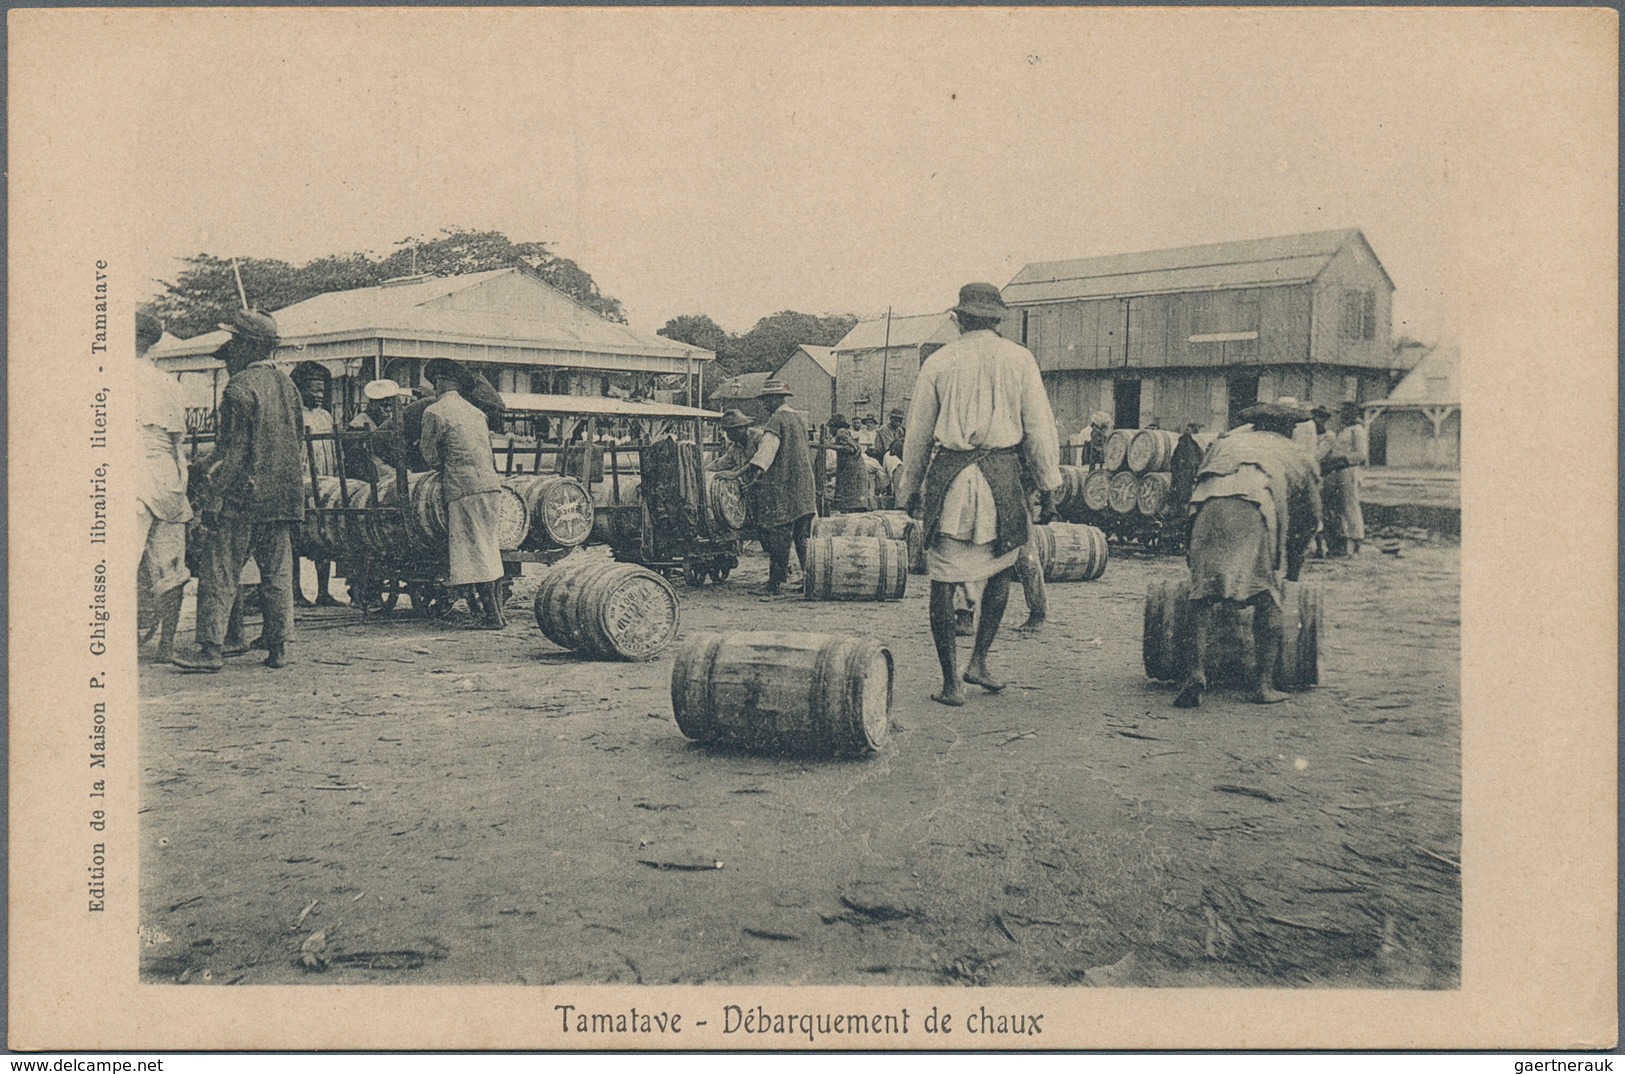 Madagaskar: 1905/1960 (ca.), almost exclusively before 1930, collection/accumulation of nearly 1000